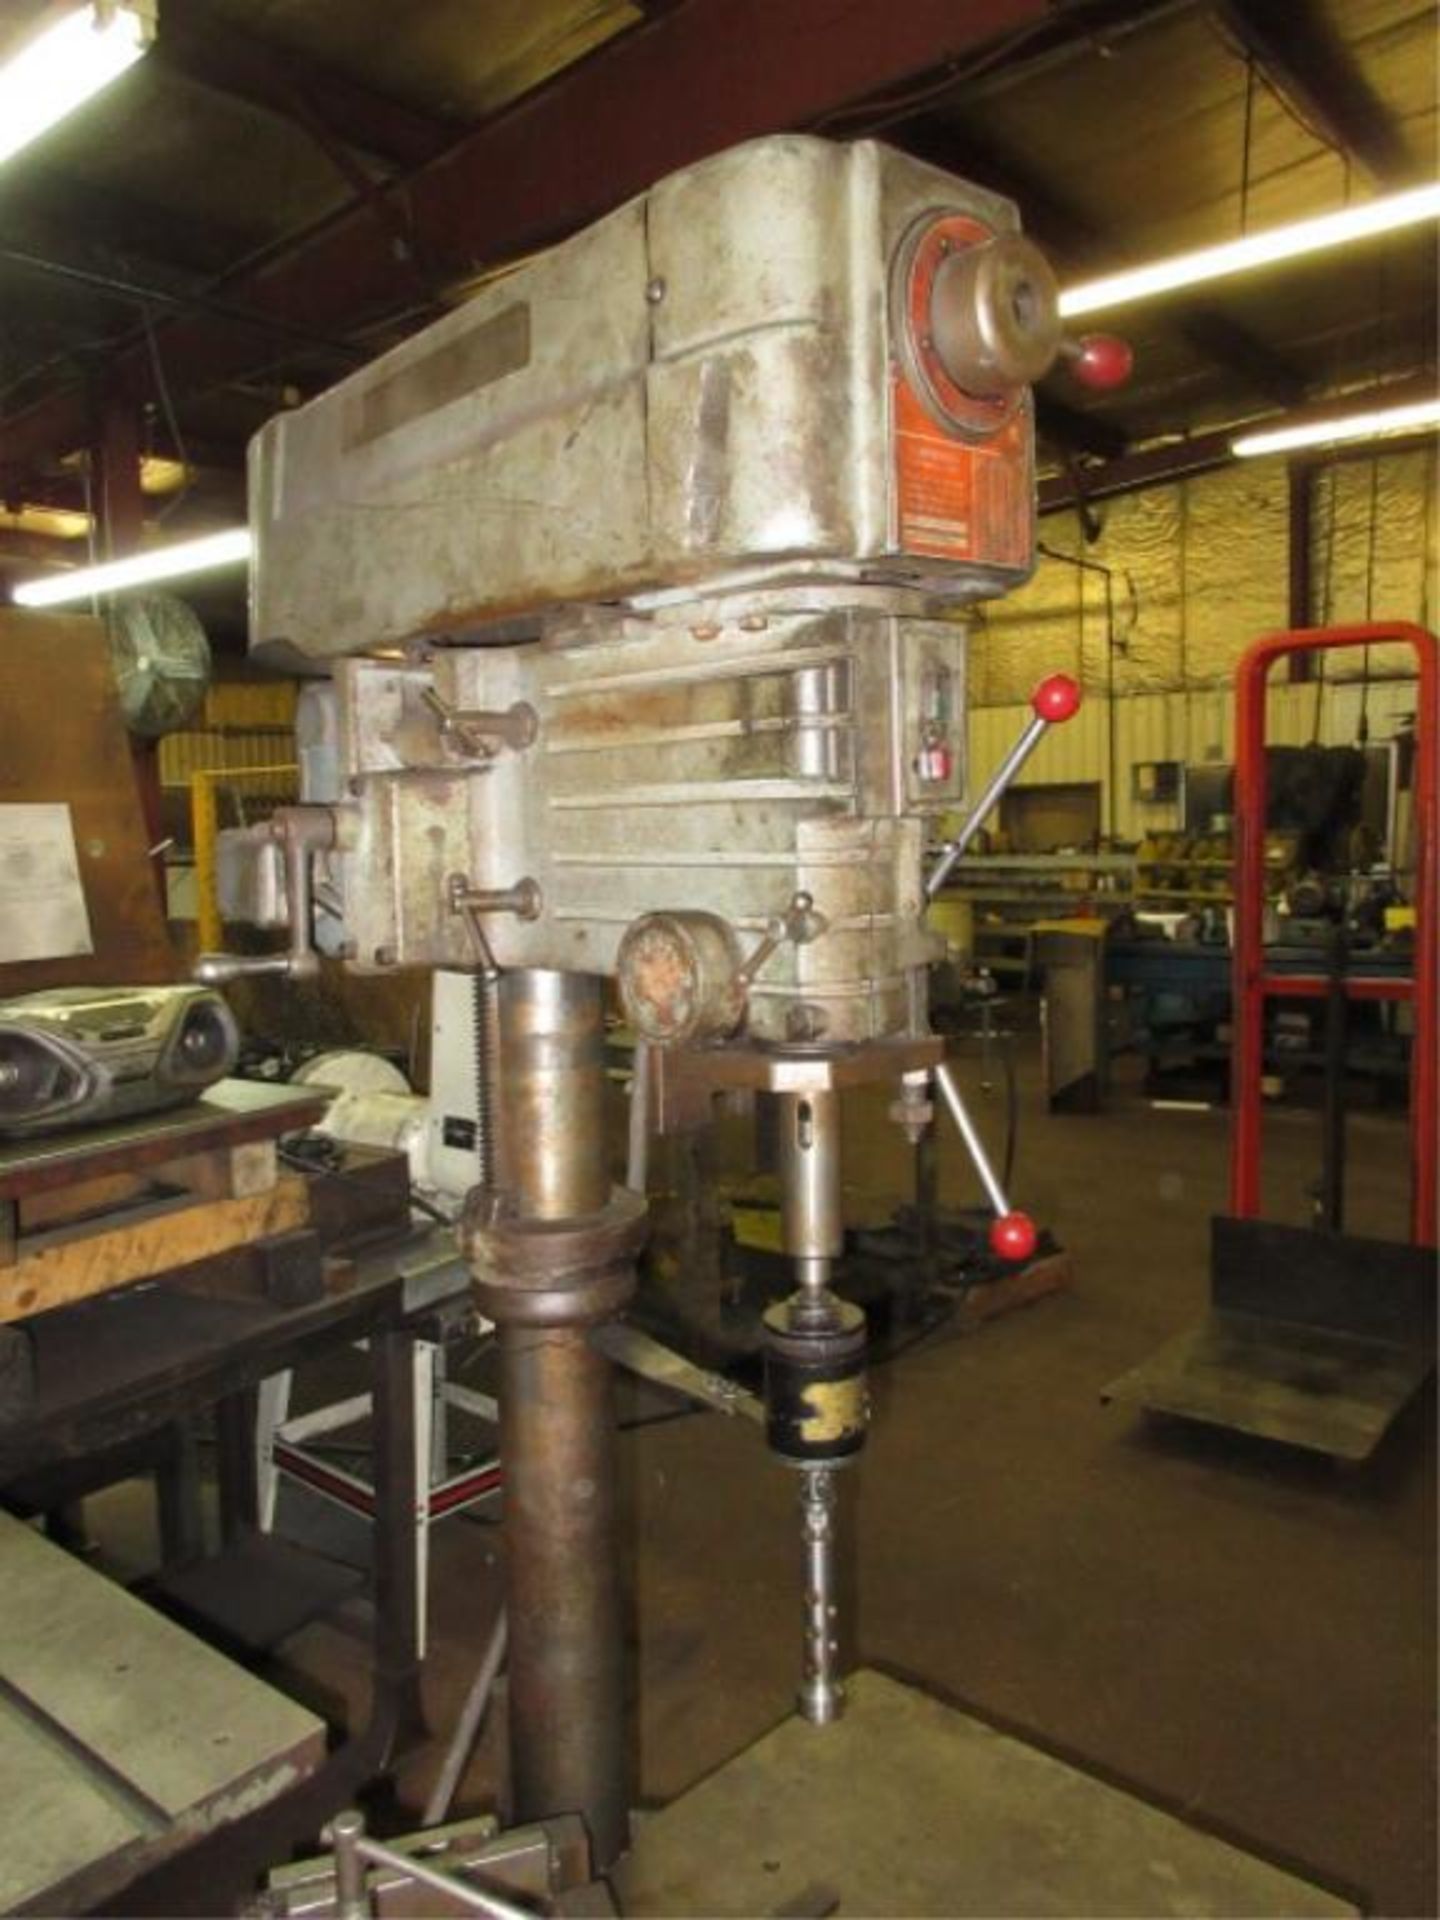 Powermatic Drill Press. Powermatic 1200 20" Variable Speed Drilling/Tapping Machine, 1-hp, spindle - Image 3 of 5